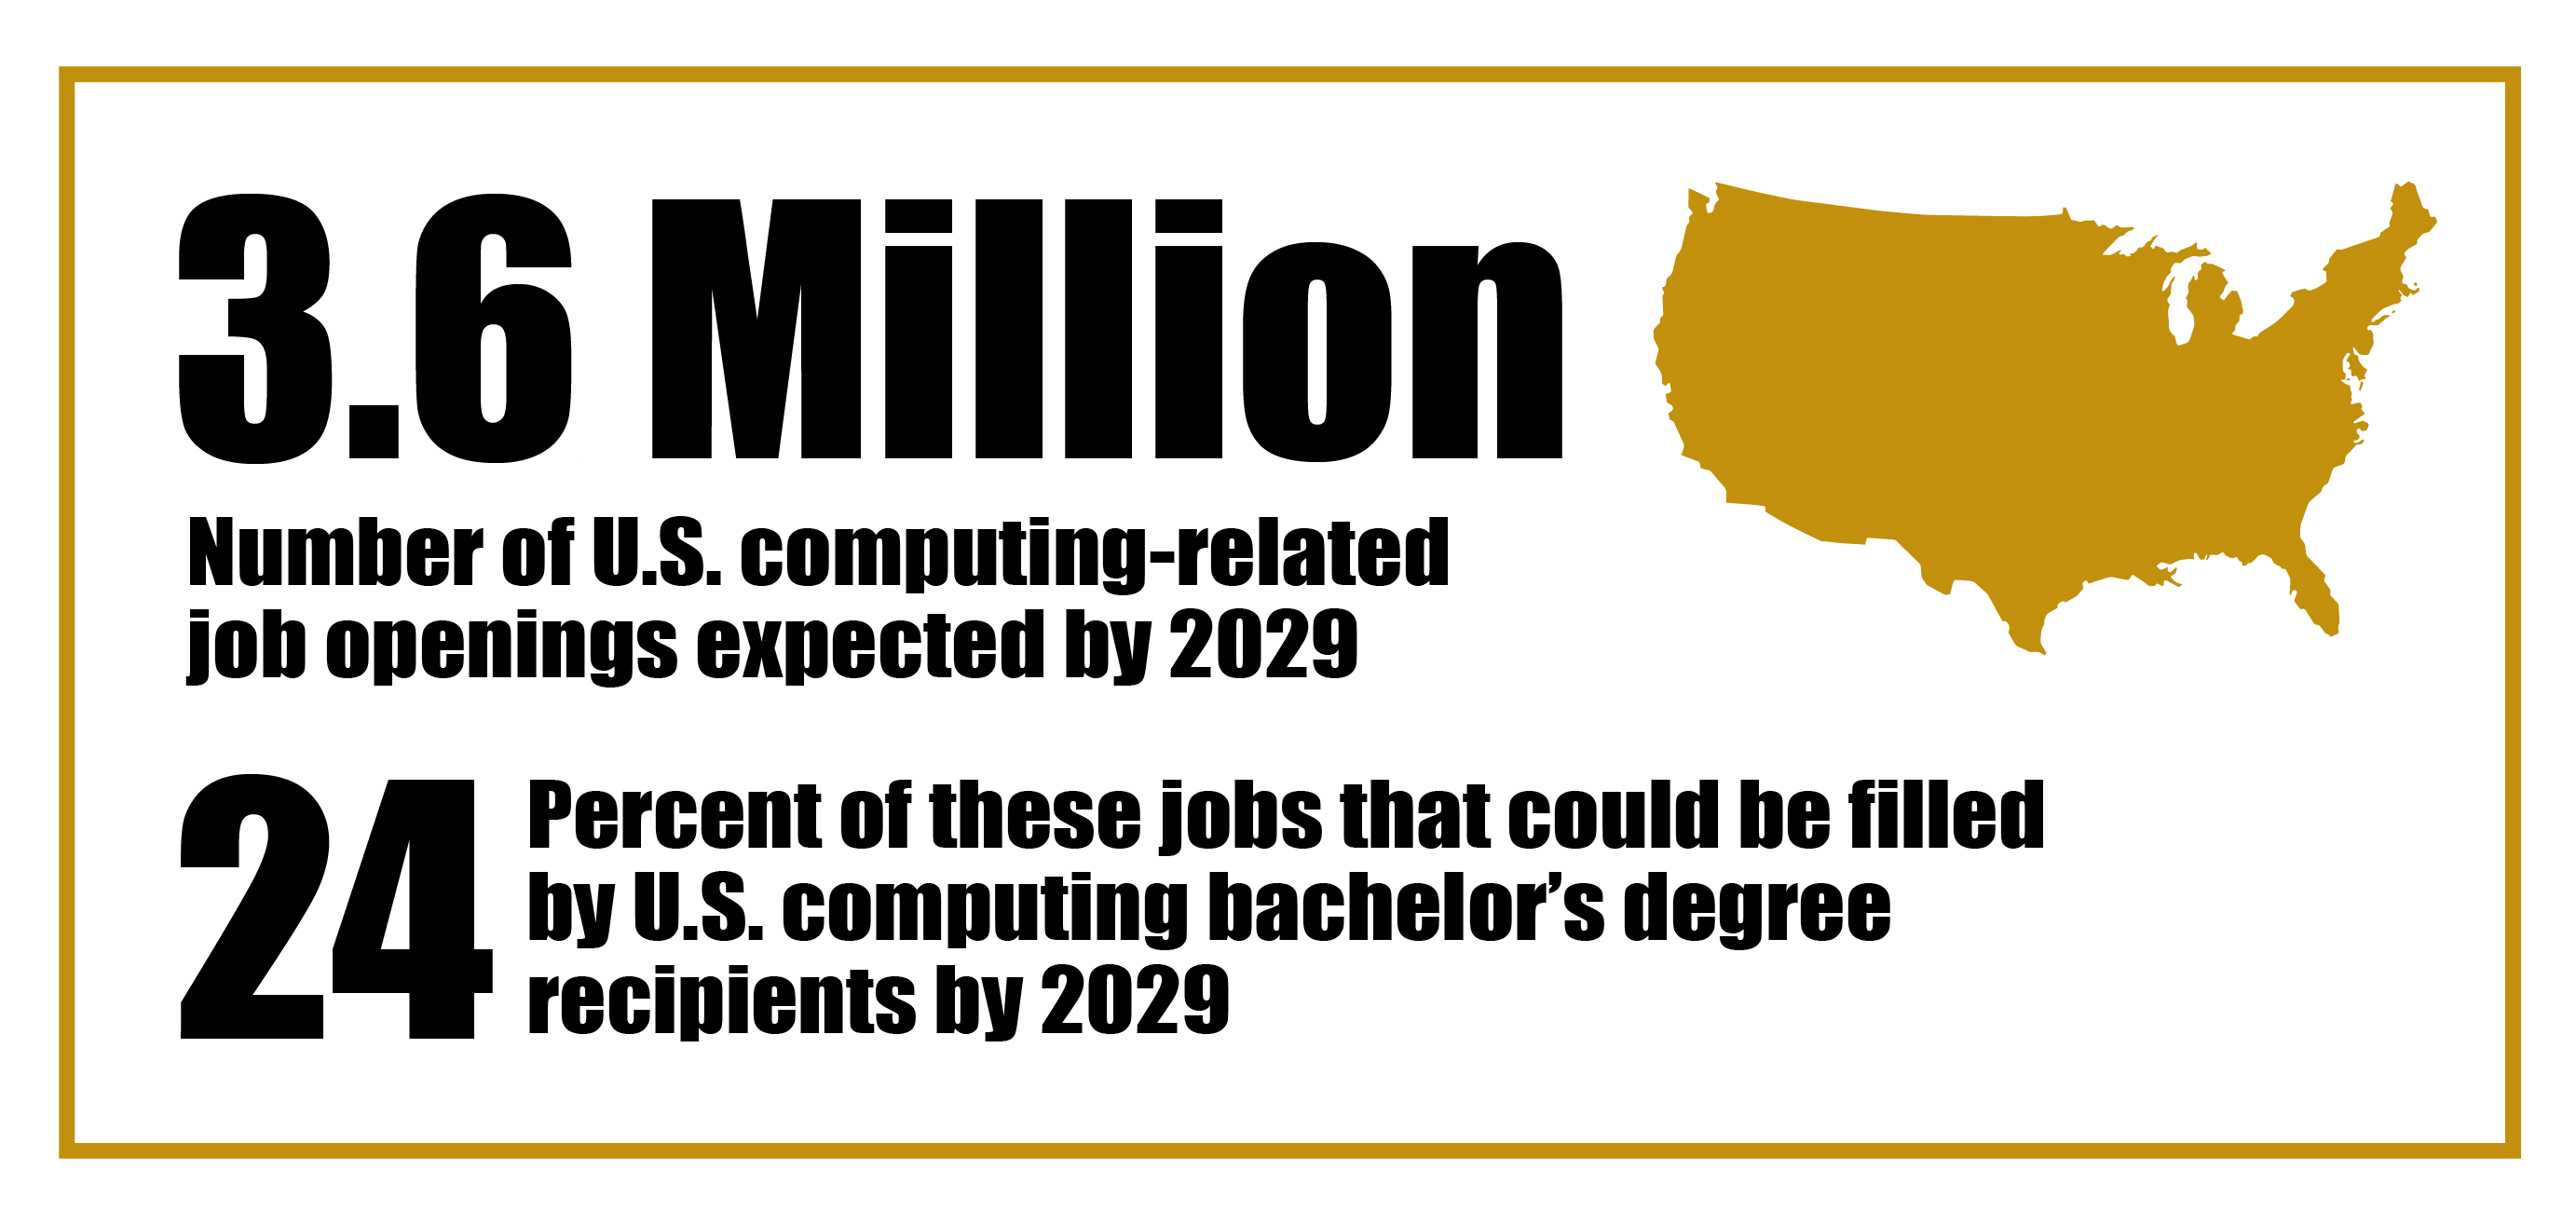 3.6 million: the number of U.S. computing-related job openings expected by 2029. 24: the percent of these jobs that could be filled by U.S. computing bachelor's degree recipients by 2029.